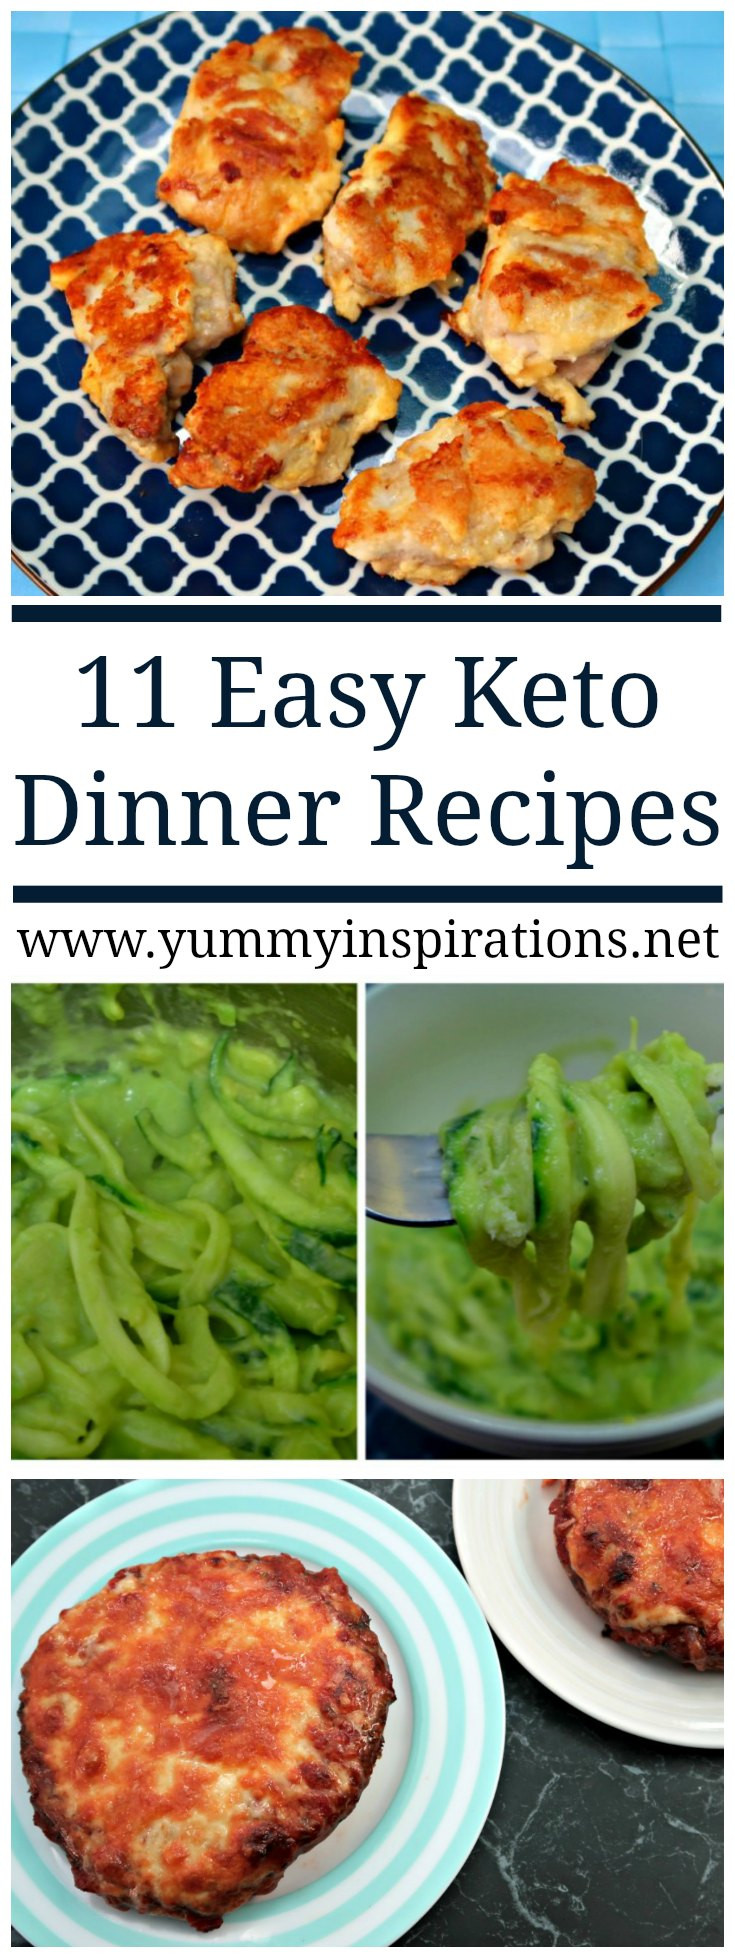 Keto Dinners For Two
 11 Easy Keto Dinner Recipes Quick Low Carb Ketogenic